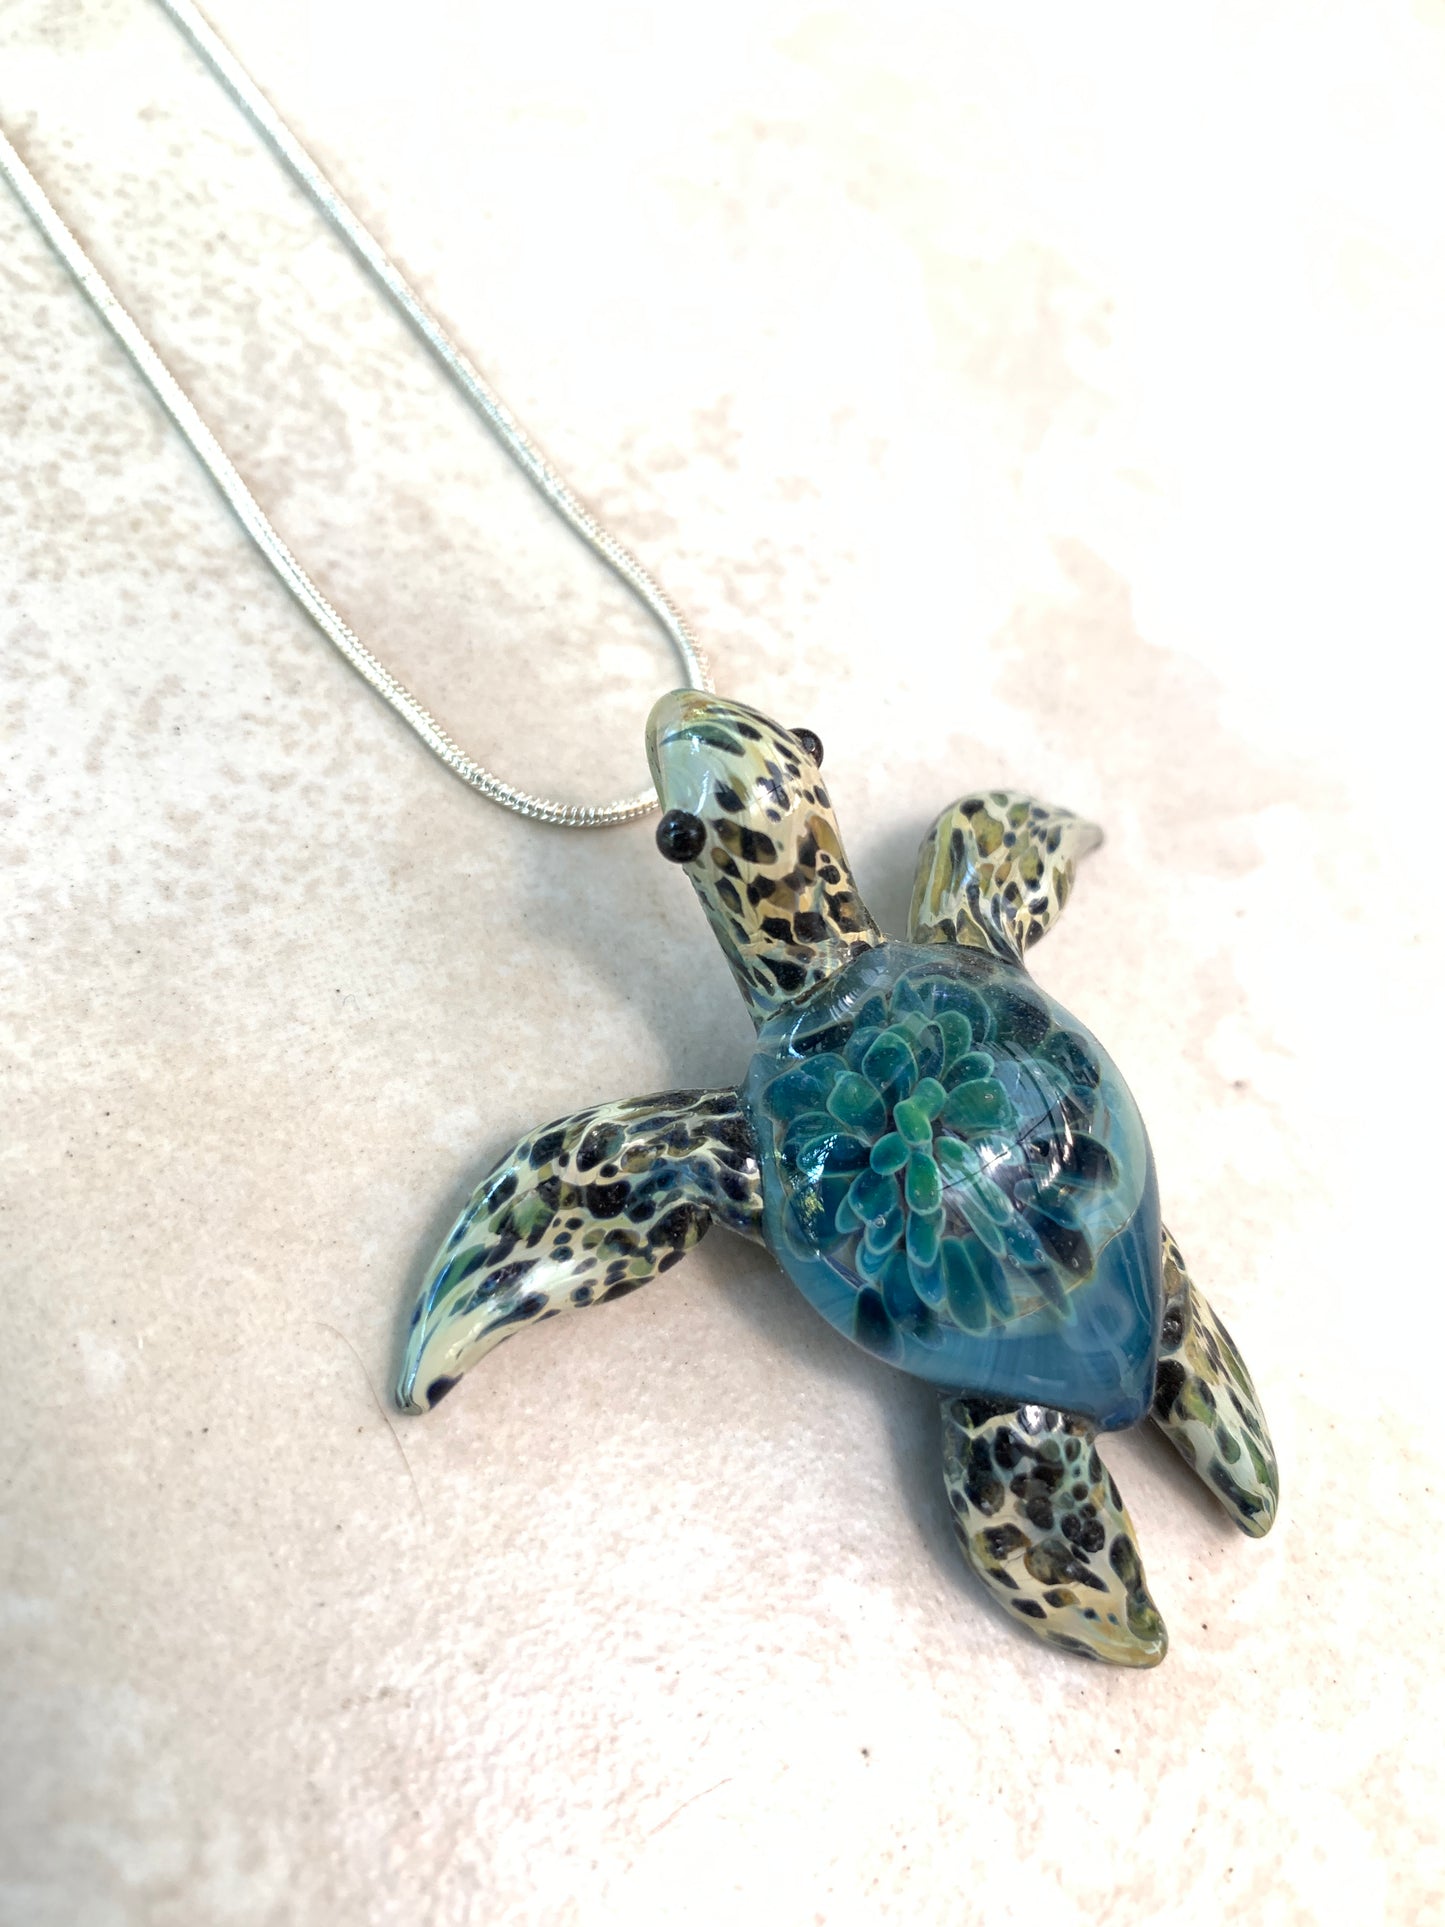 Sea Turtle Jewelry Pendant Blown Glass Necklace Great Gift Idea for Him or Her